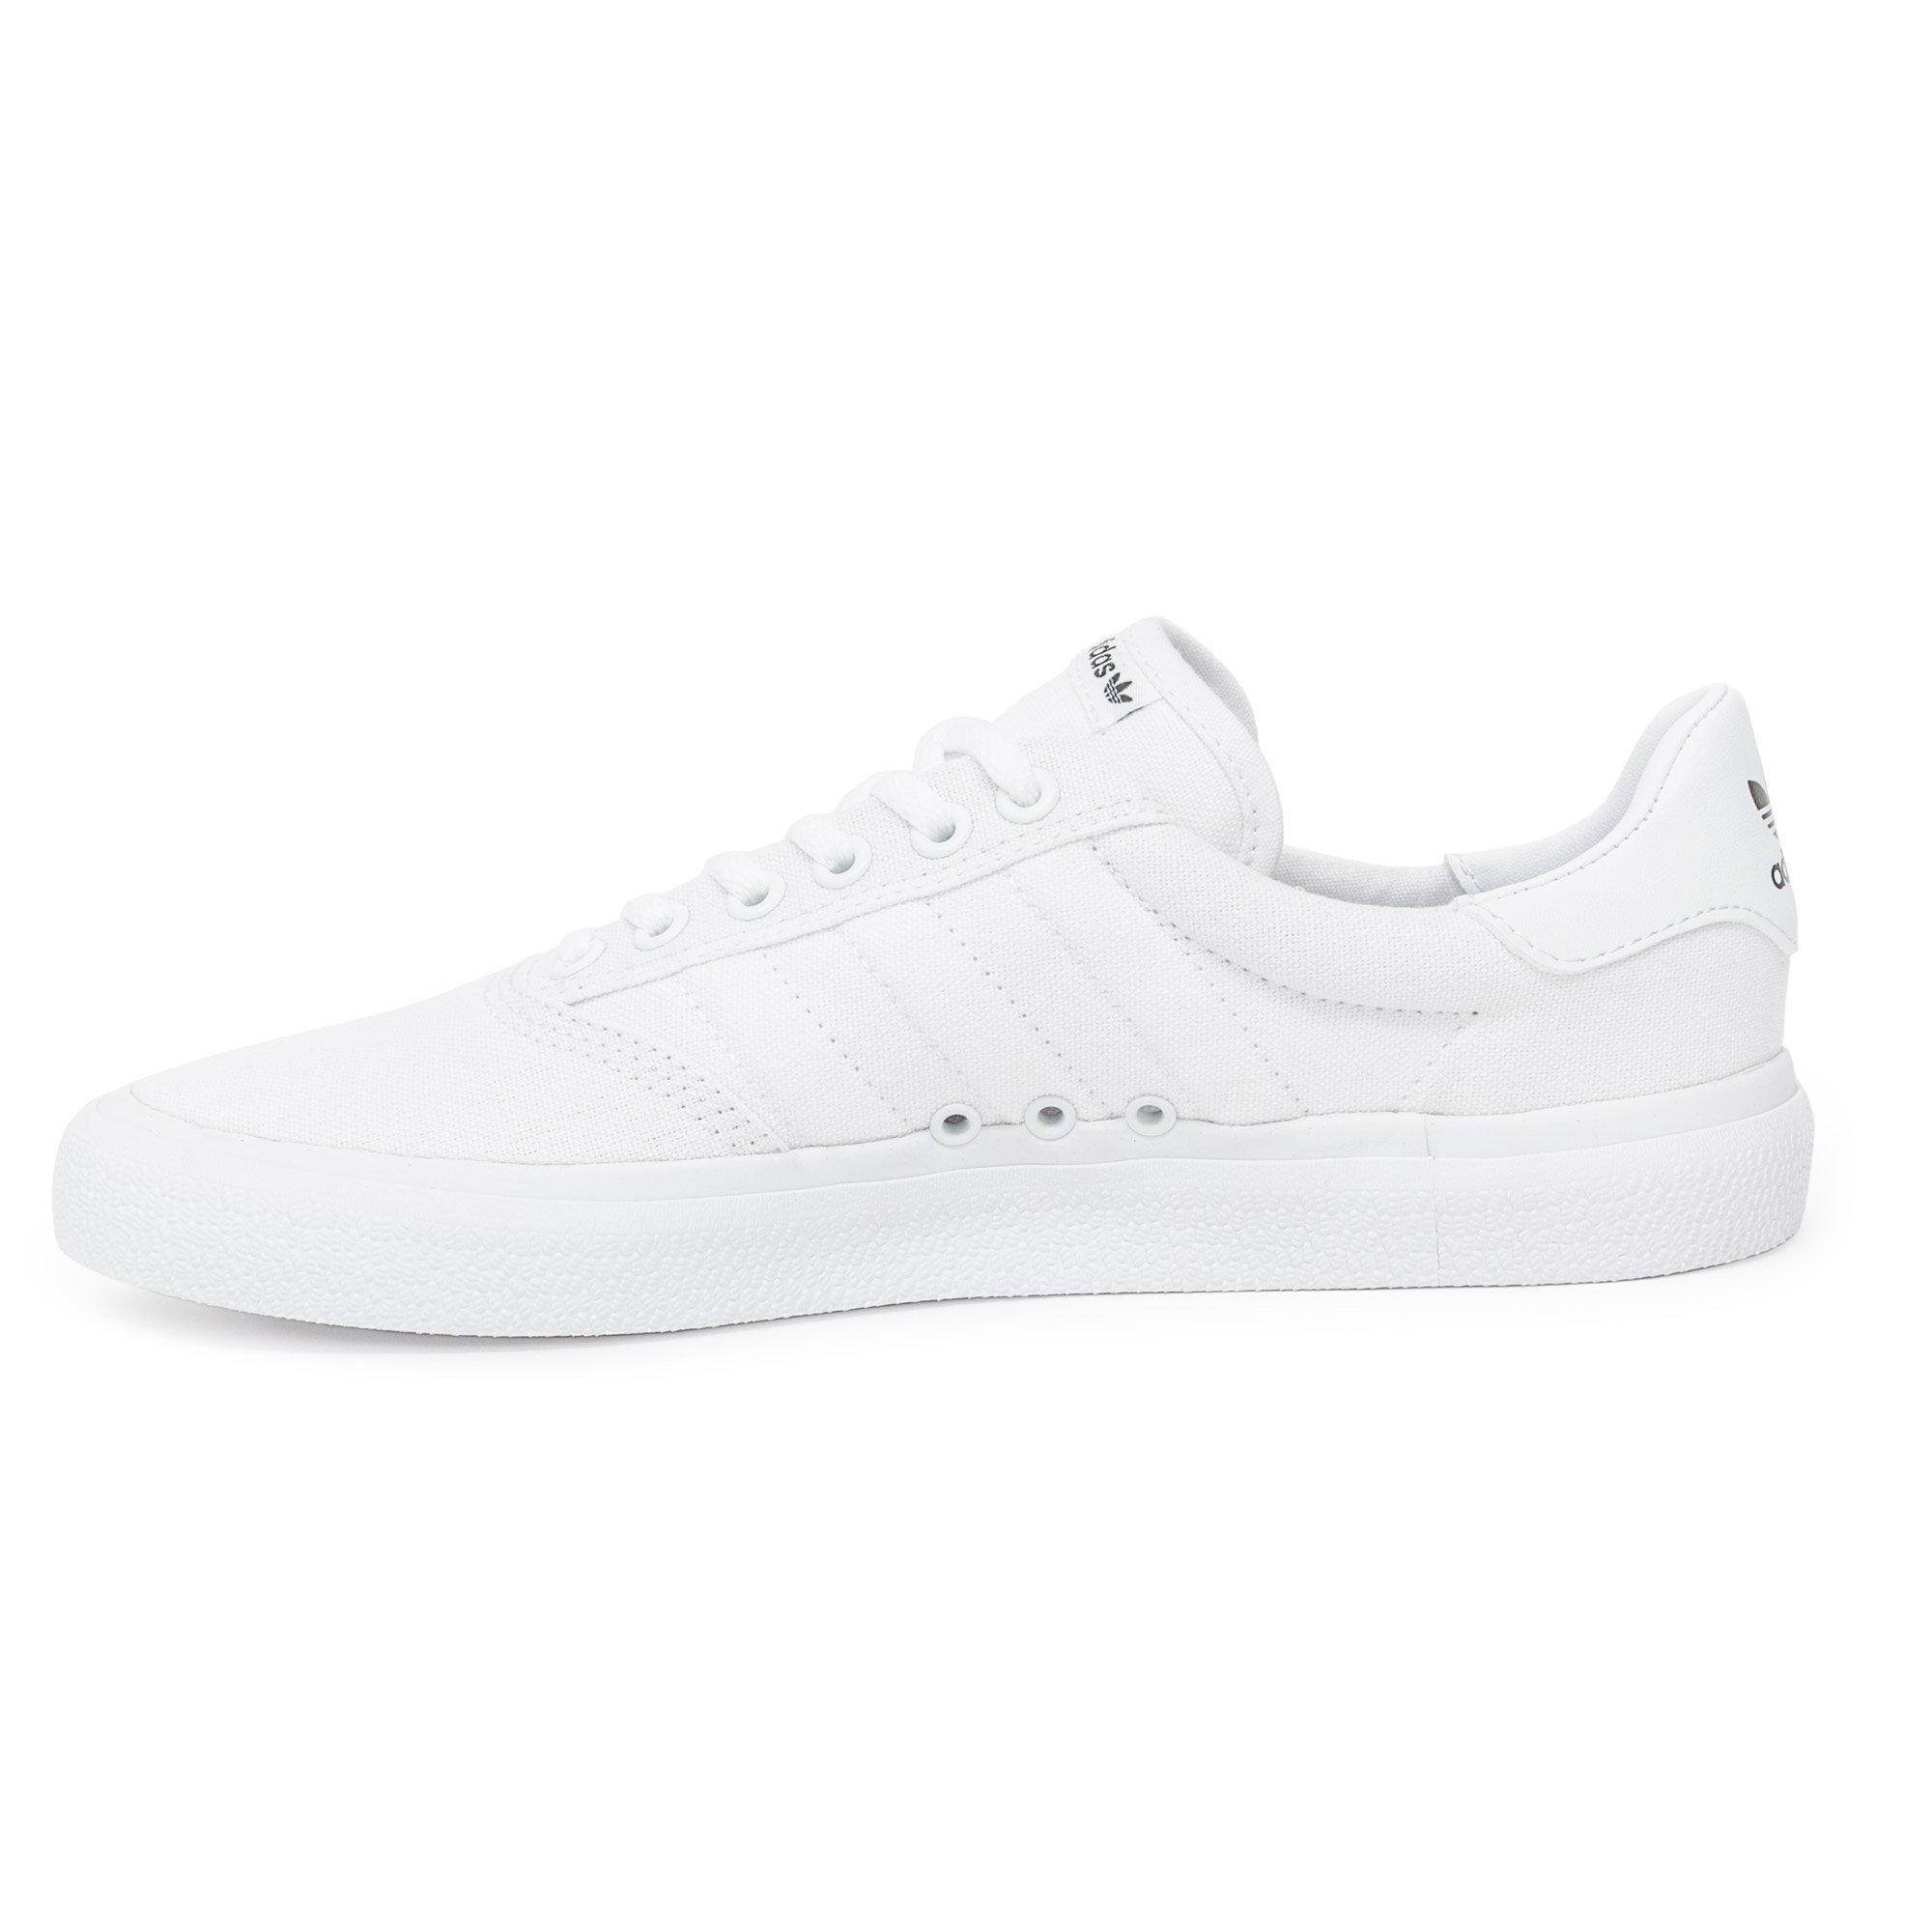 adidas Canvas 3mc Vulc Shoes in White for Men - Lyst